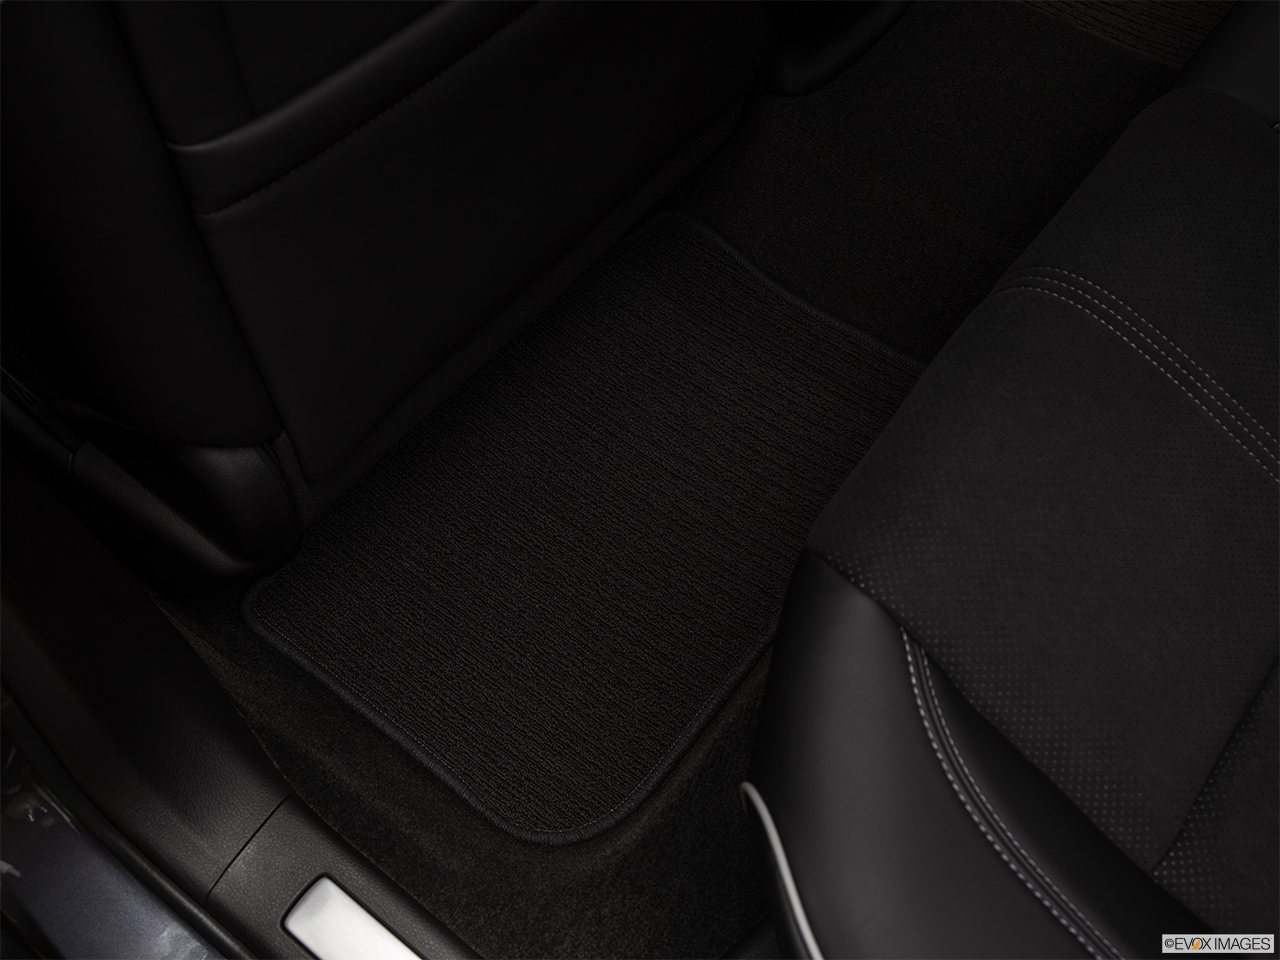 2020 Acura TLX 3.5L Rear driver's side floor mat. Mid-seat level from outside looking in. 